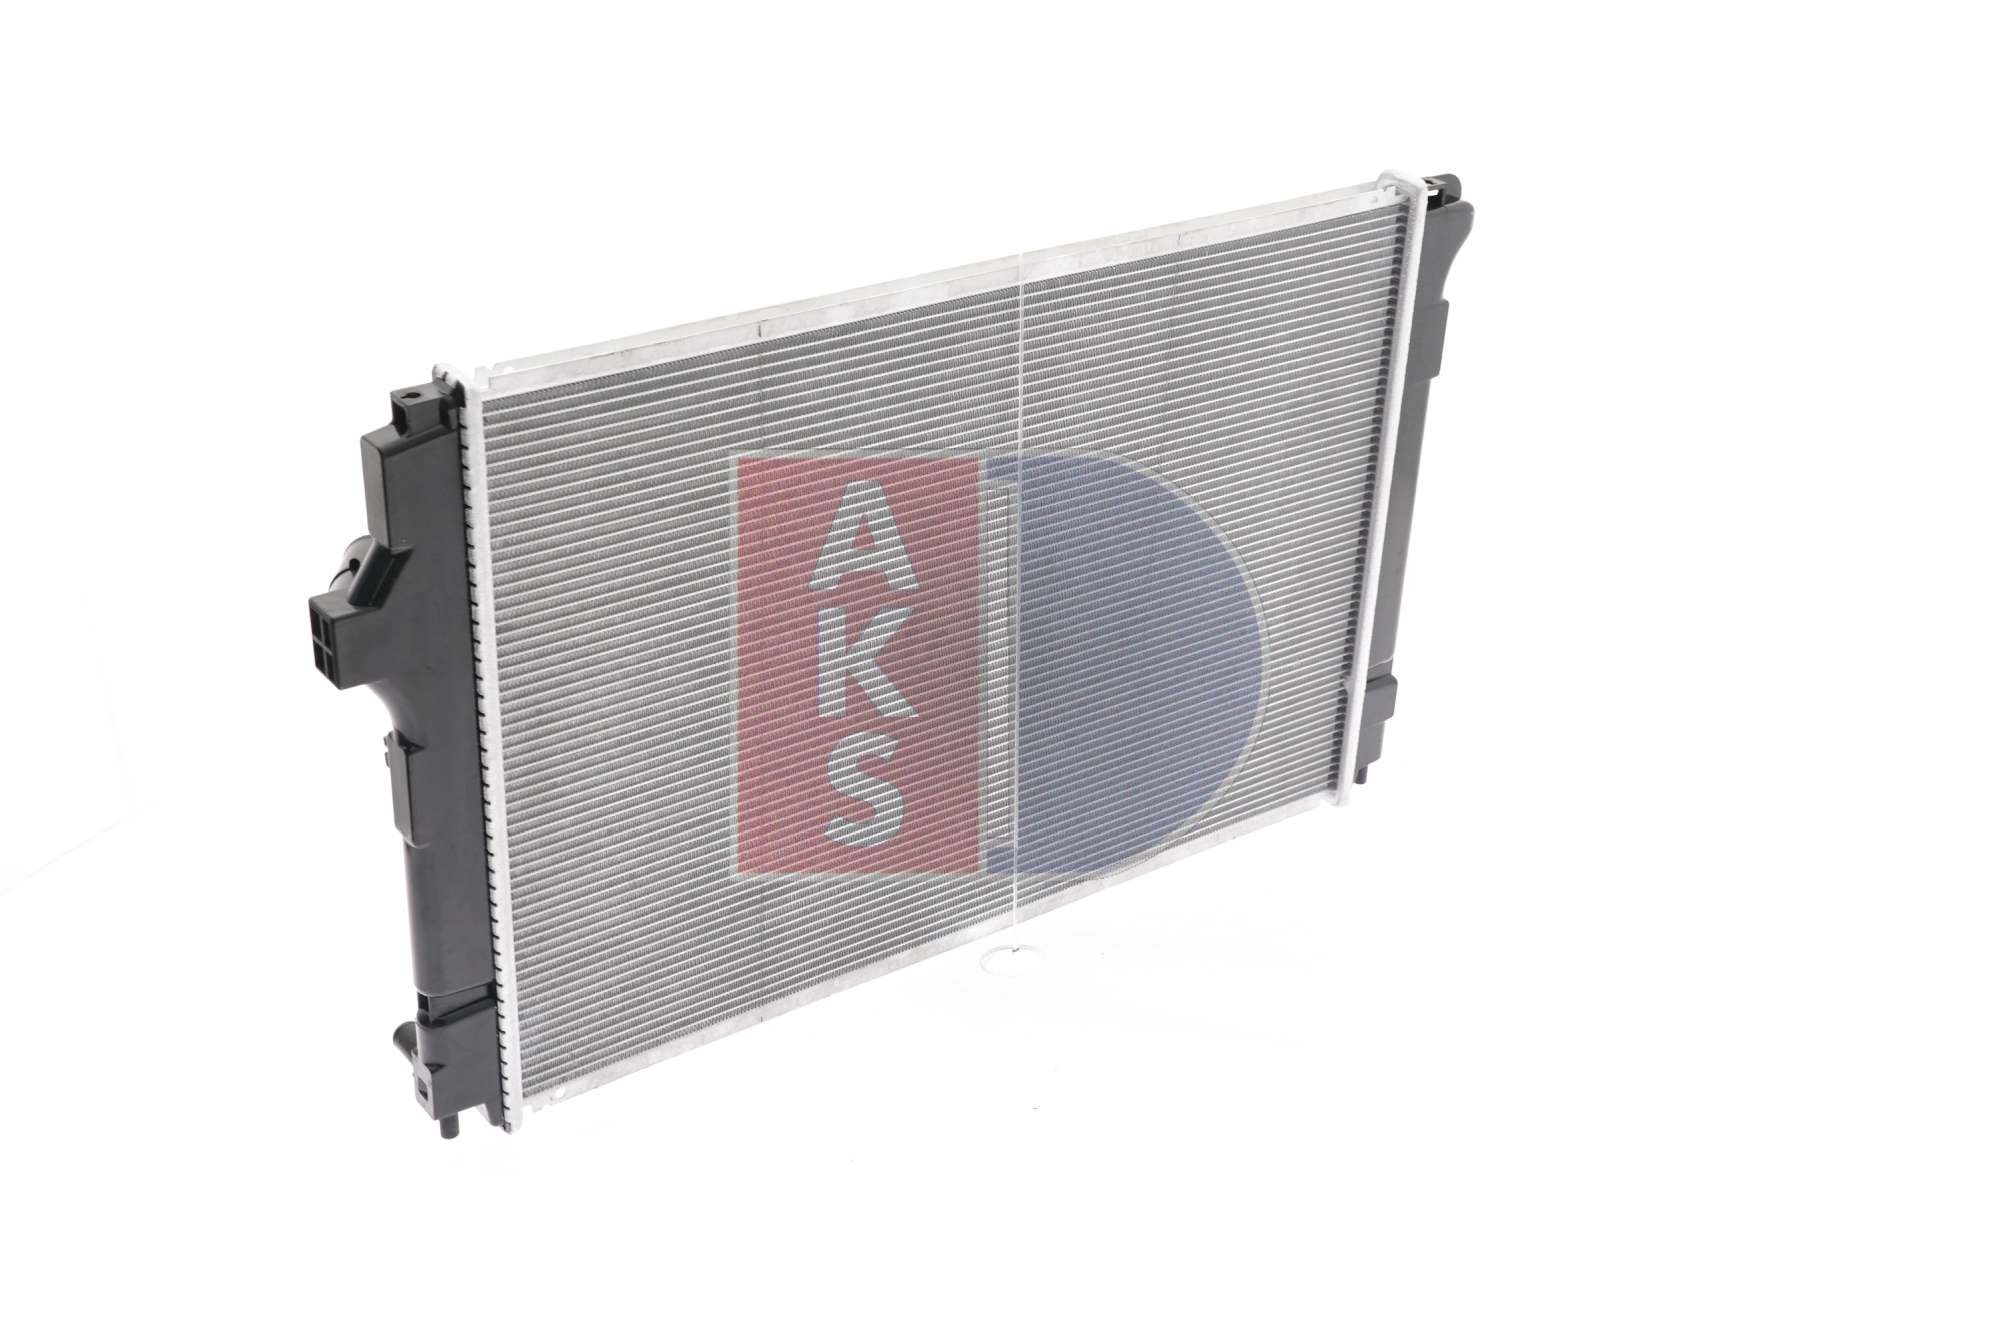 210255N Radiator 210255N AKS DASIS for vehicles with/without air conditioning, 600 x 426 x 16 mm, Automatic Transmission, Brazed cooling fins